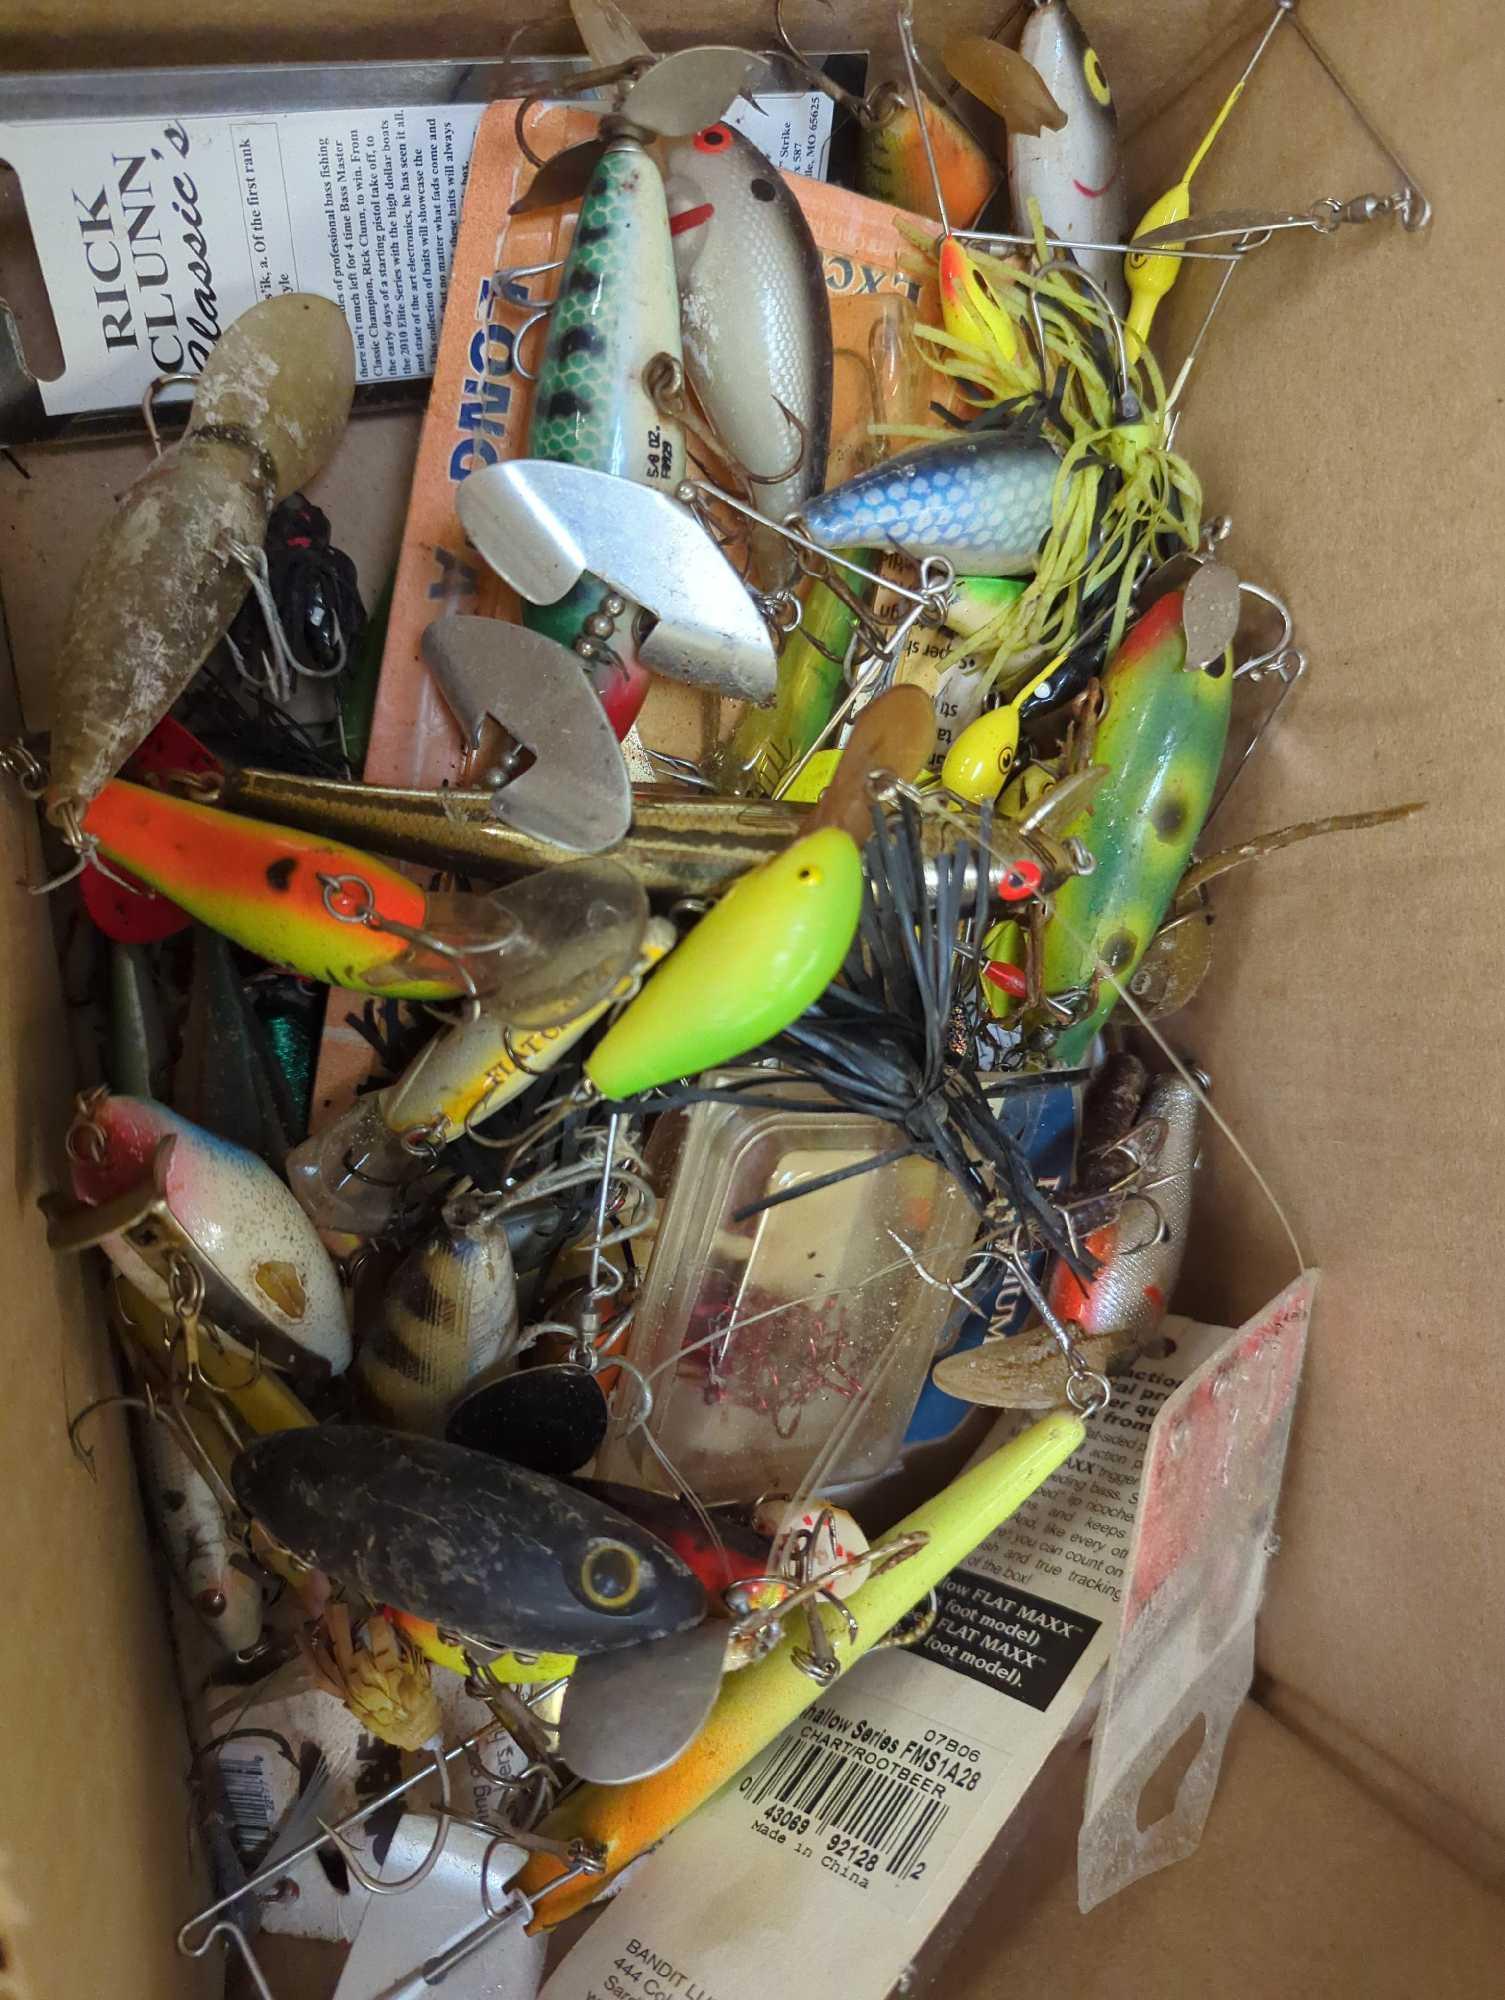 Box of various fishing lures and other fishing accessories. Comes as is shown in photos. Appears to